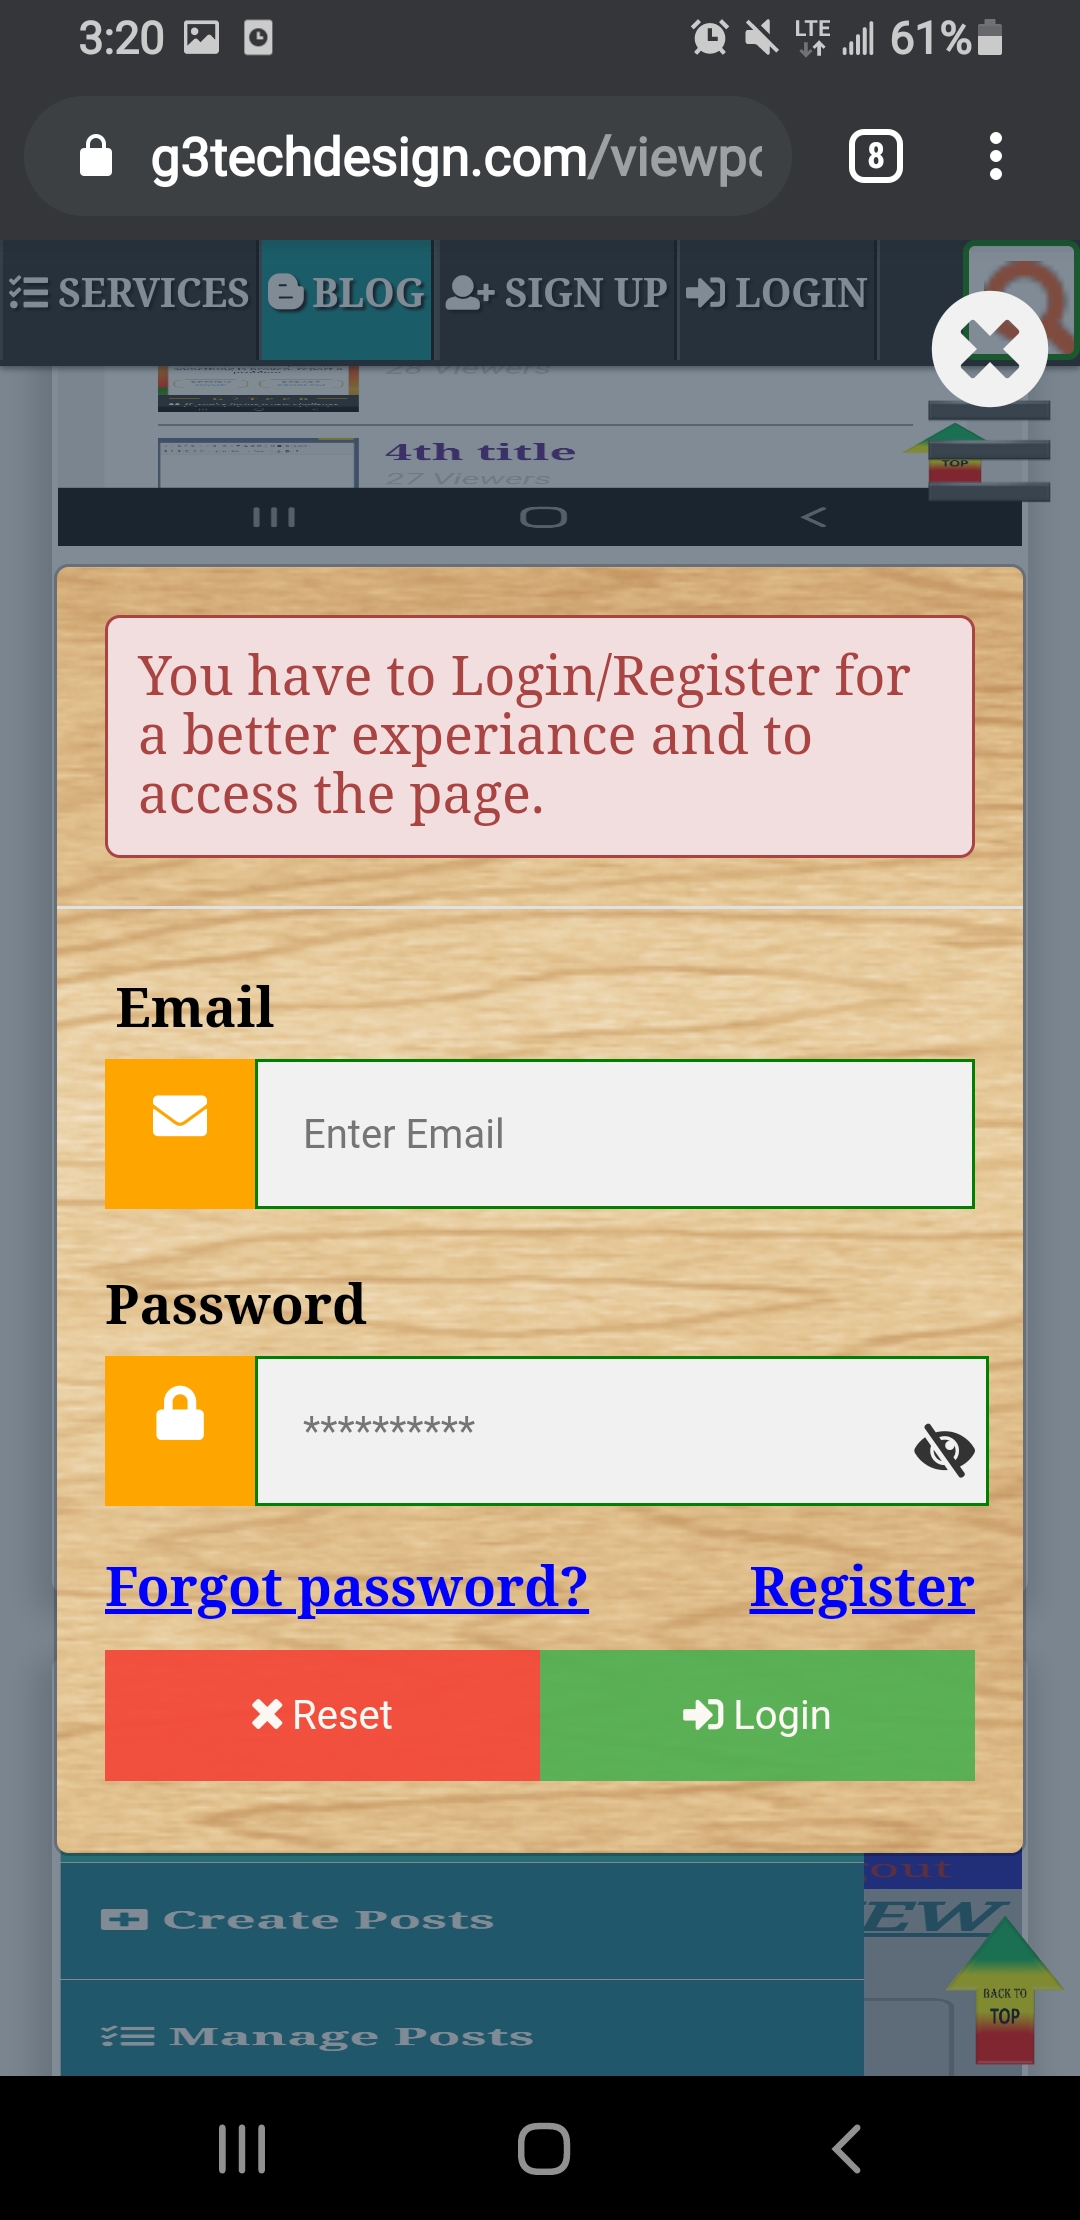 Inactive user enforce to login (SESSION expired) or Limmit the resource image